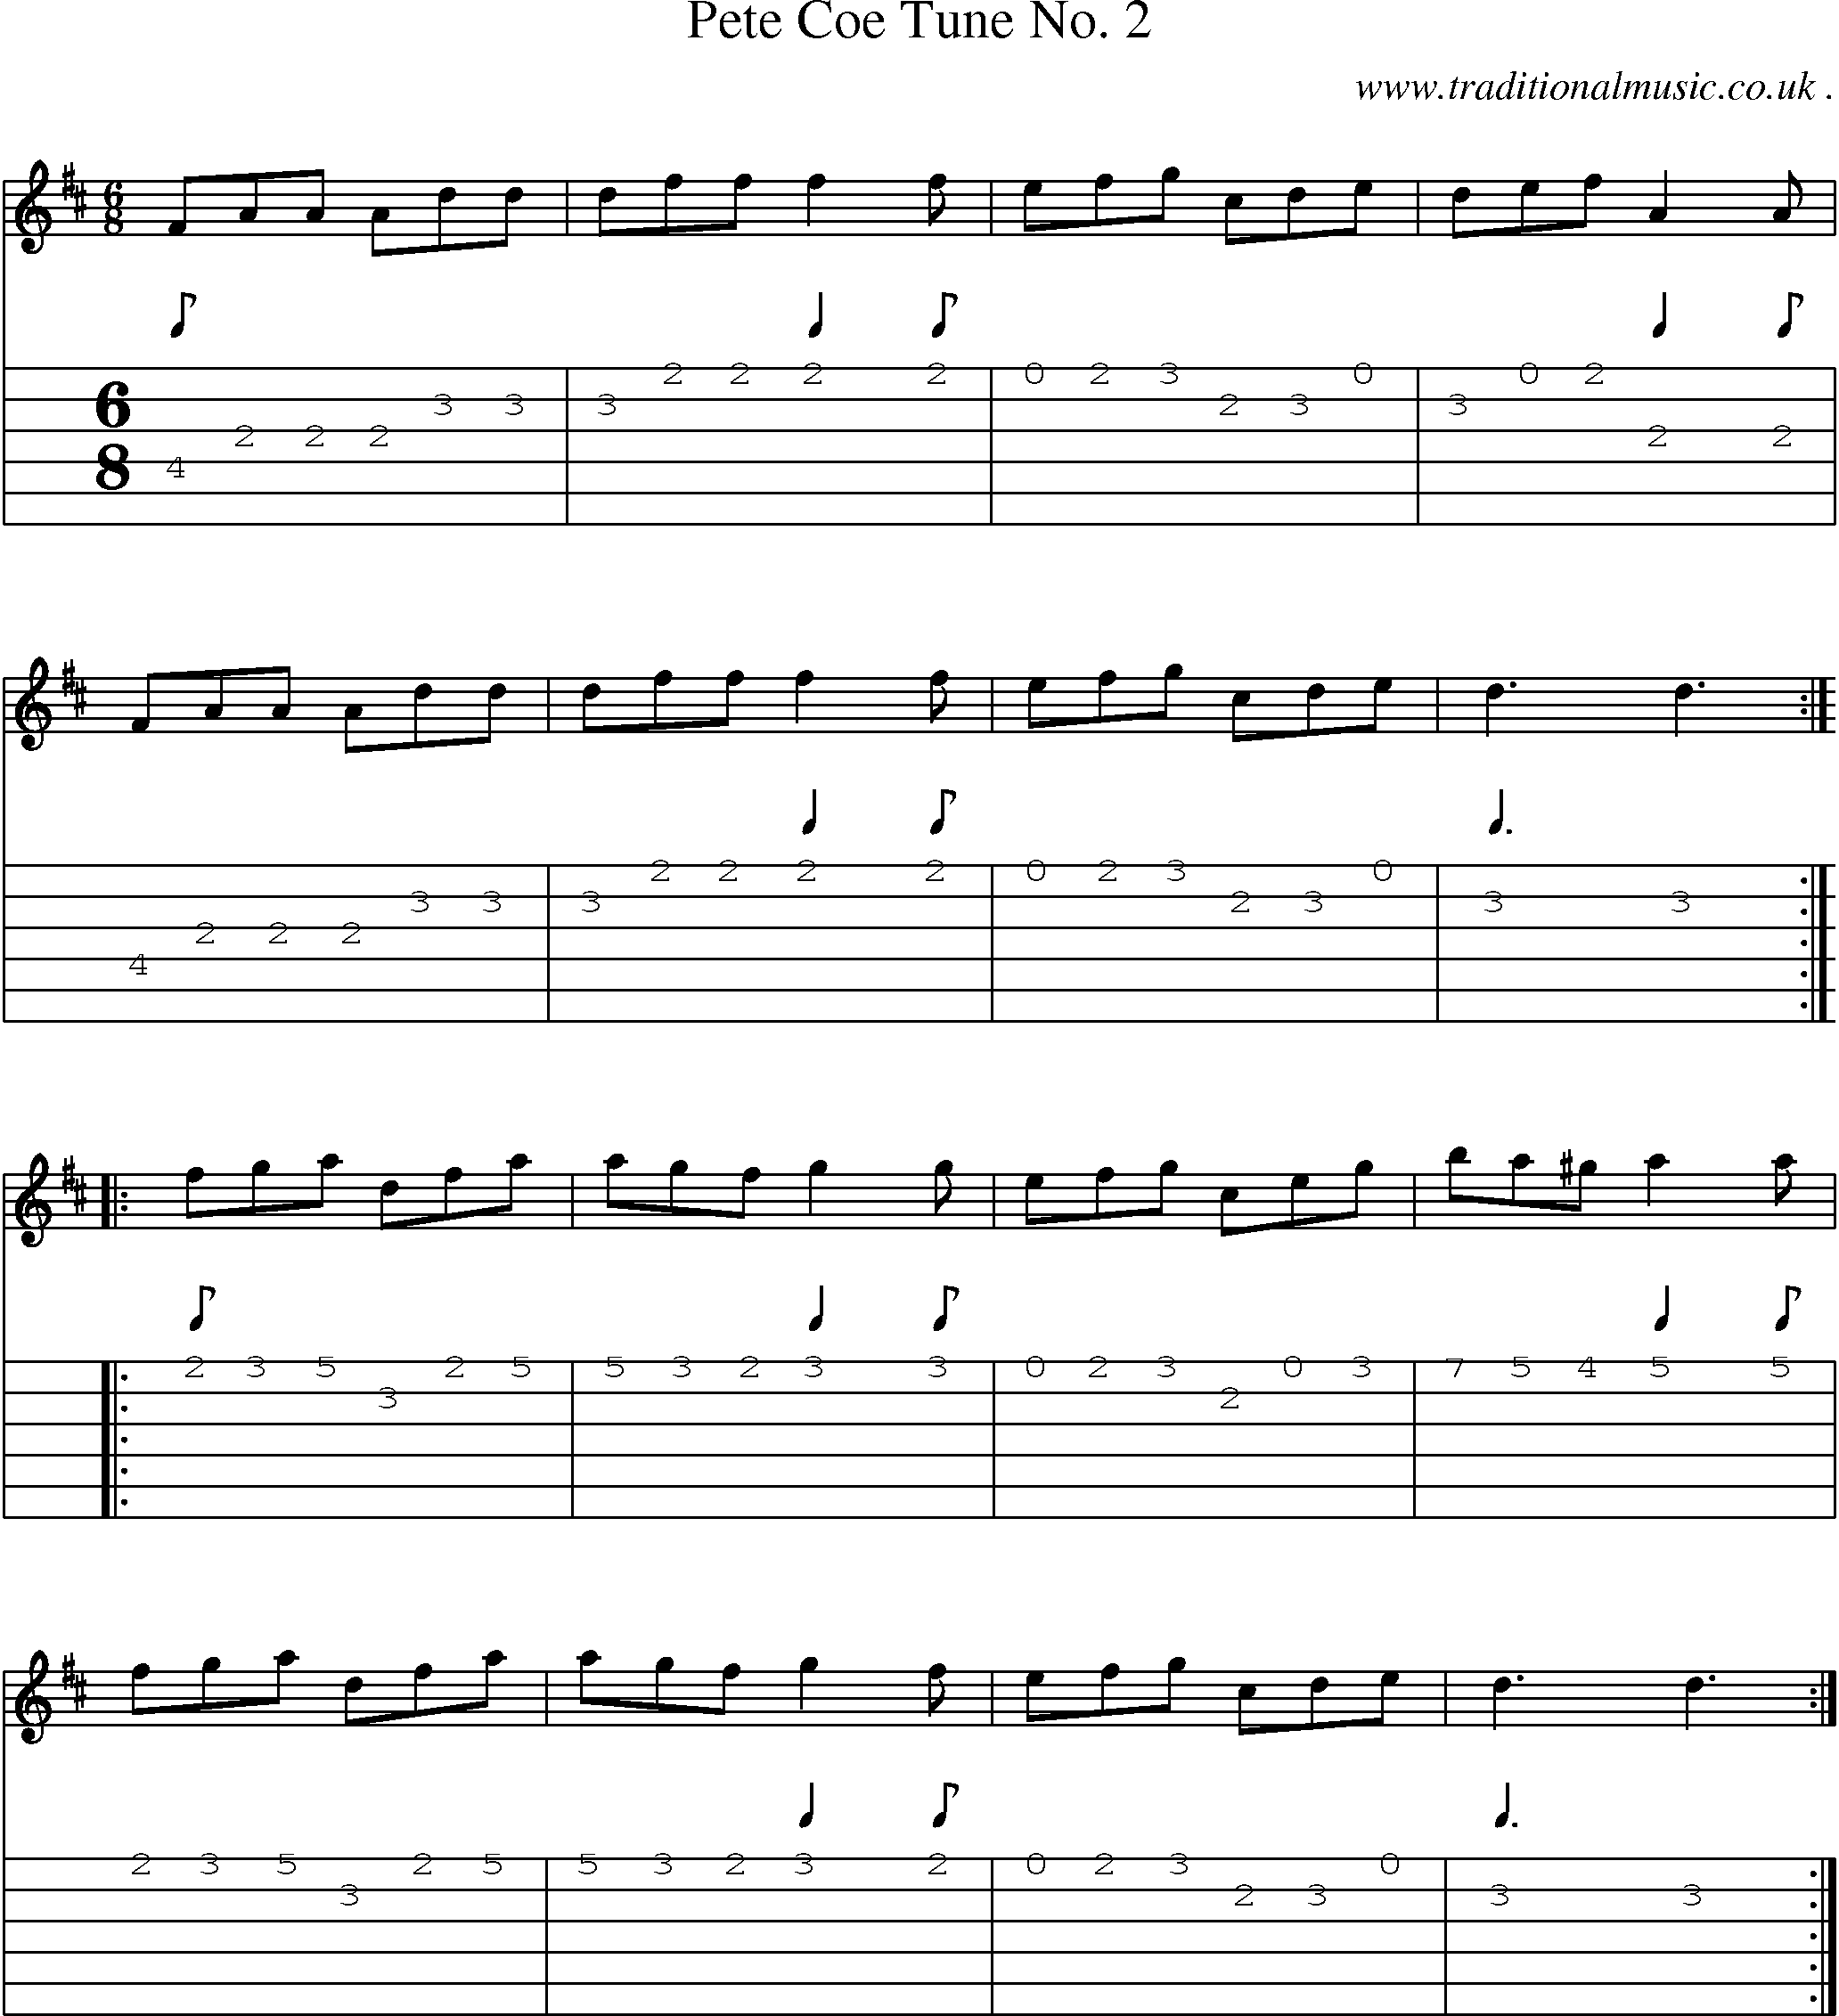 Sheet-Music and Guitar Tabs for Pete Coe Tune No 2